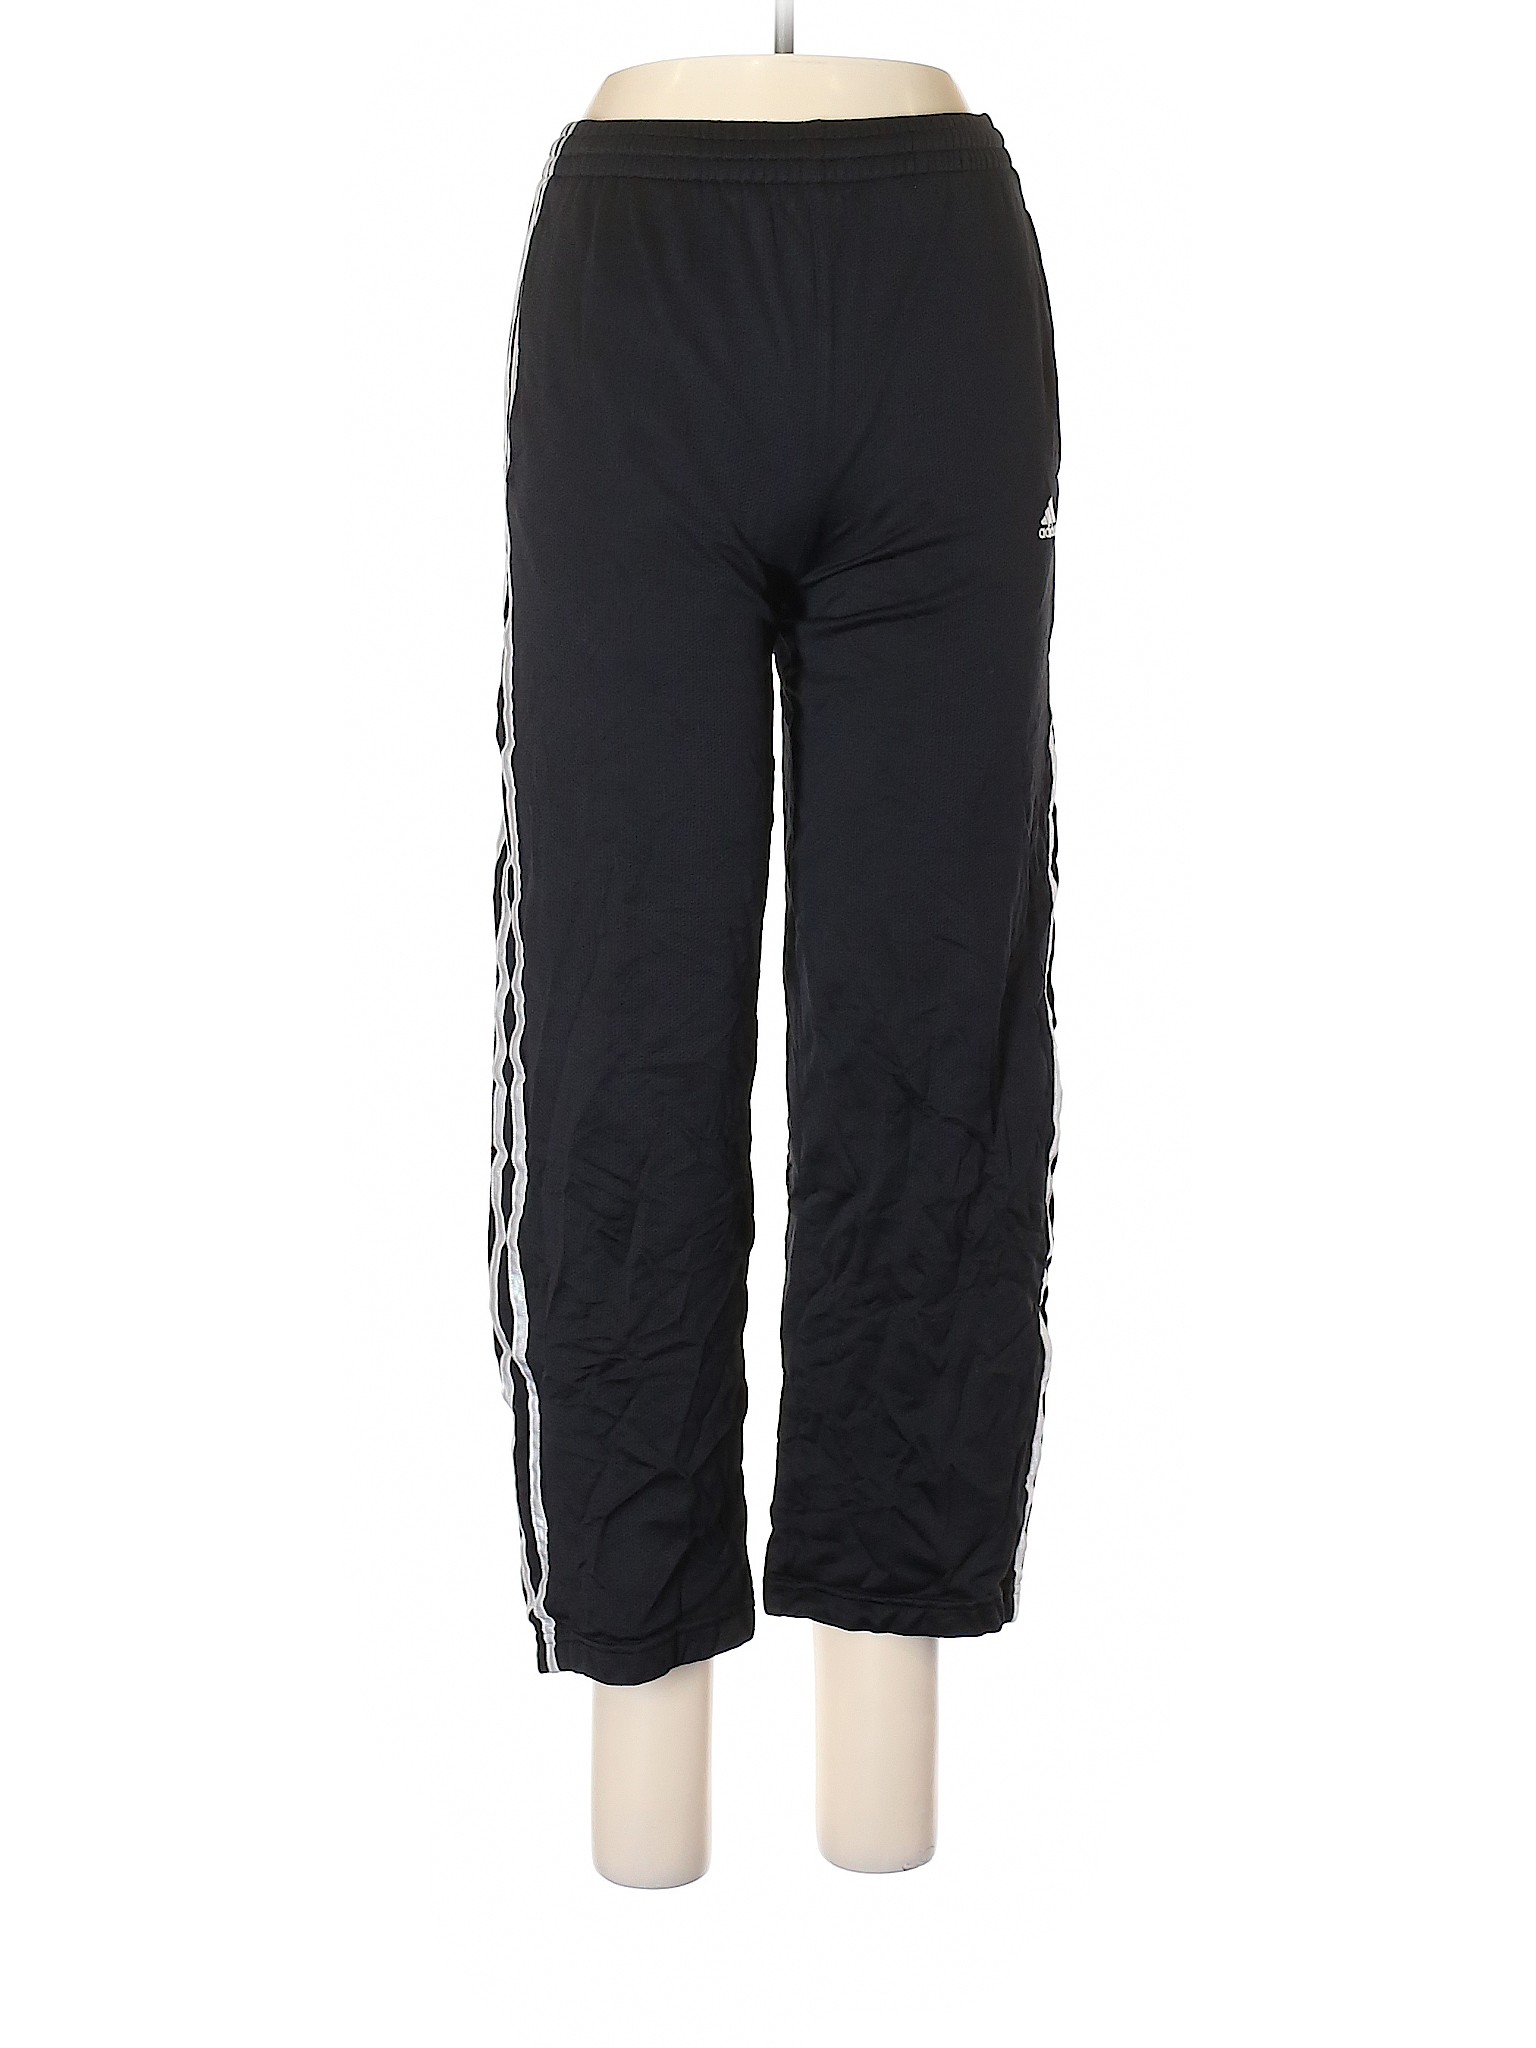 Adidas 100% Polyester Solid Black Active Pants Size L - 71% off | thredUP